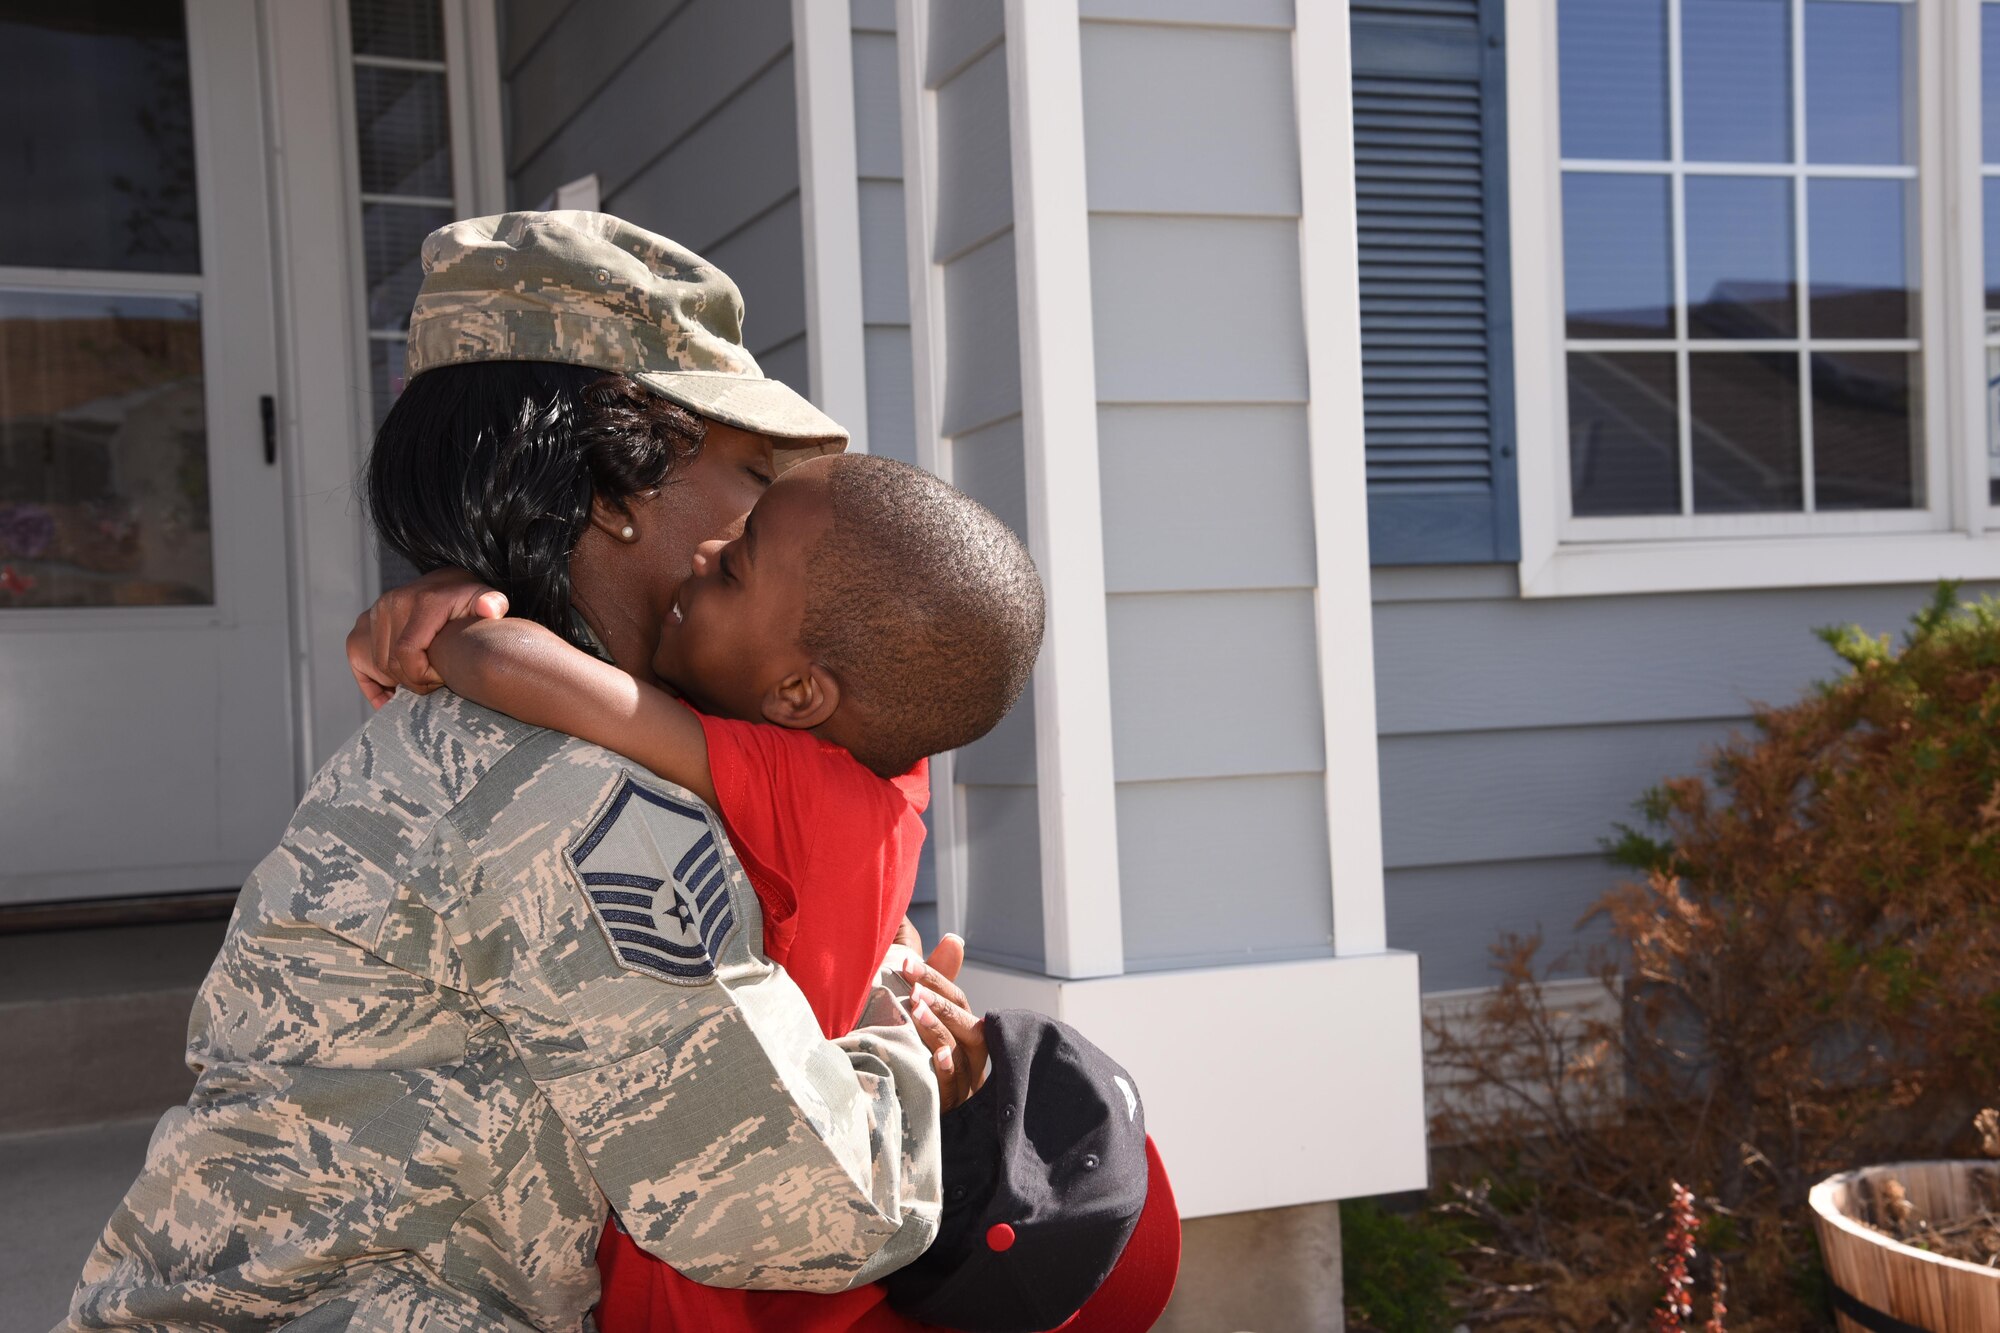 U.S. Air Force Master Sgt. Lateisha Nunn hugs her son after picking him up from school at Malmstrom Air Force Base Mont., May 5, 2016. Malmstrom leadership recently participated in a conference with leadership from Global Strike Command, focusing on improvements to quality of life issues. Air Force Global Strike Command is dedicating 2017 to Airmen and their families and focusing on where Airmen live, learn, play, pray and receive care. (U.S. Air Force photo/Senior Airman Jaeda Tookes)